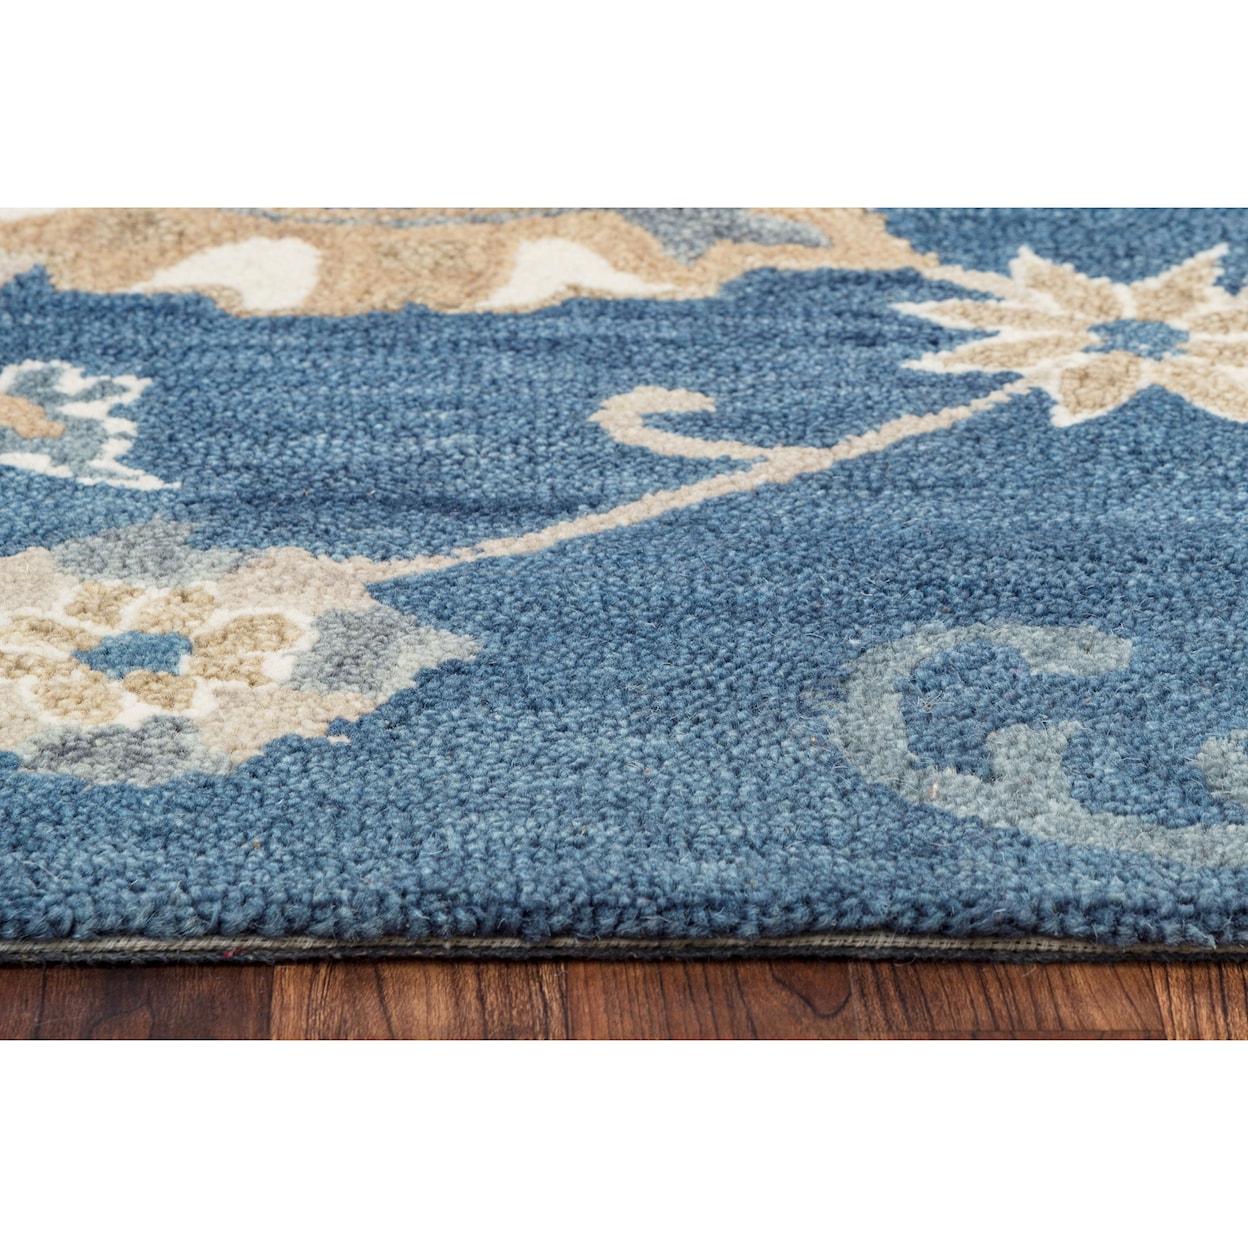 Rizzy Home Leone 2'6" x 8' Runner Rug